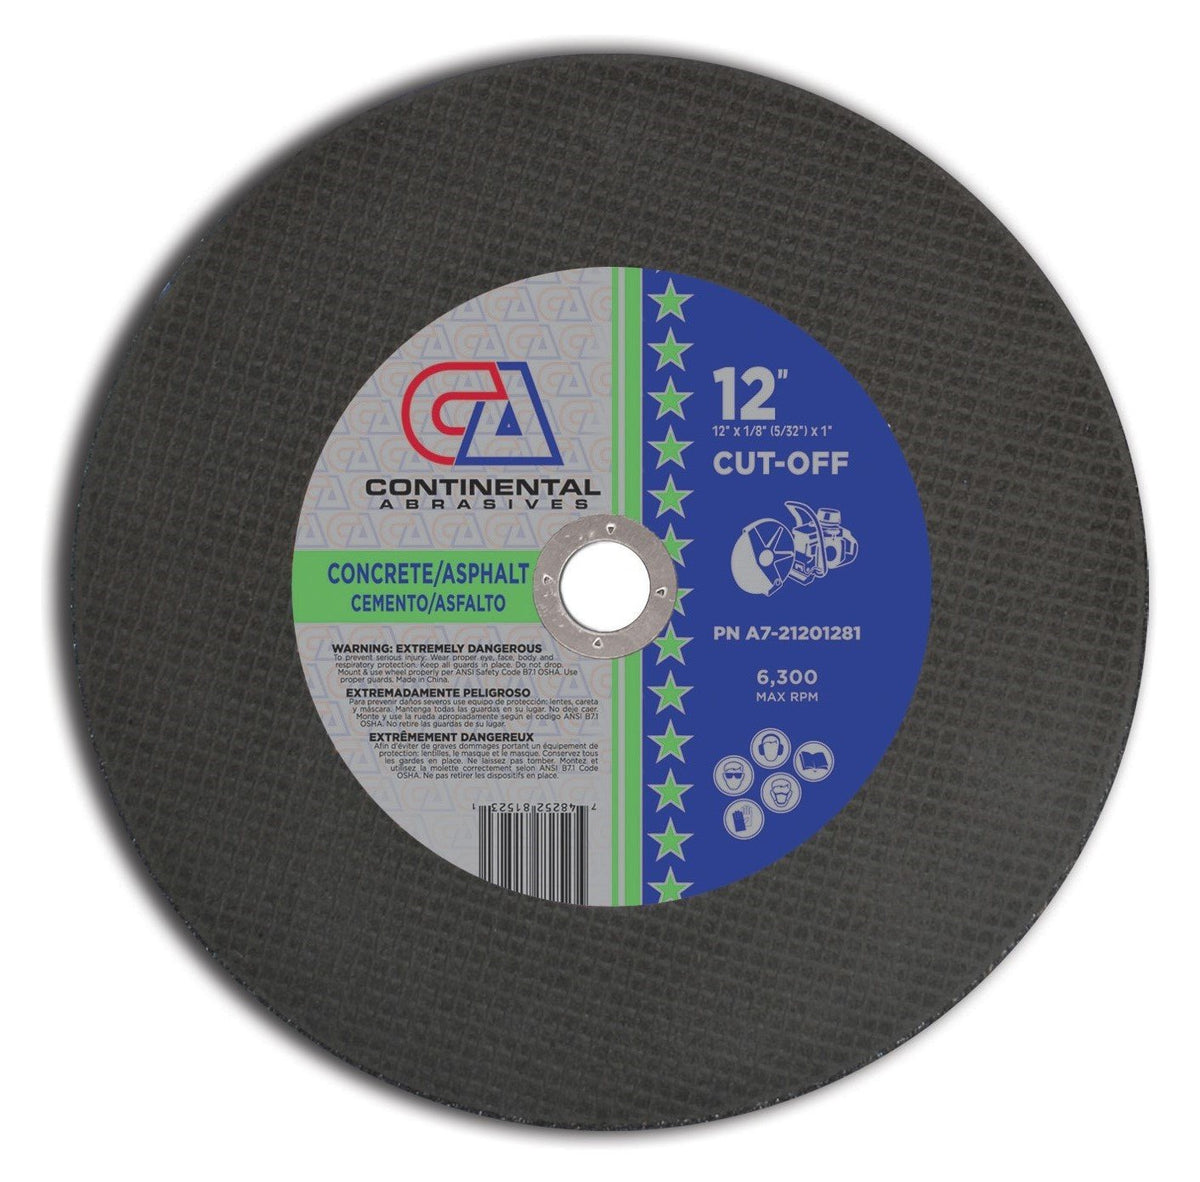 12" x 1/8" (5/32") x 1" Type 1 Gas Saw Wheels for Concrete/Asphalt (Pack of 10)